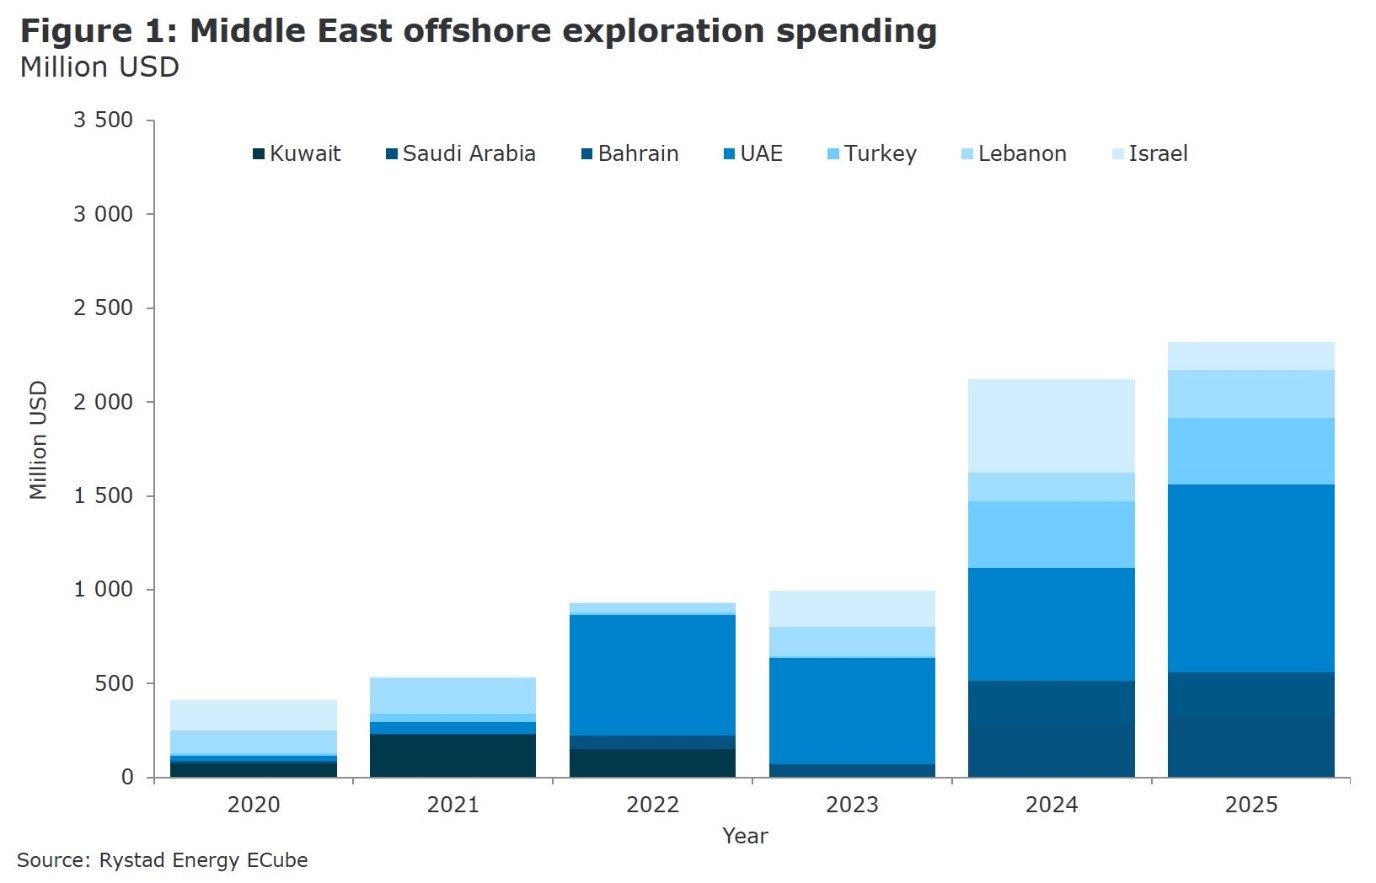 Middle East offshore exploration spending in Million USD